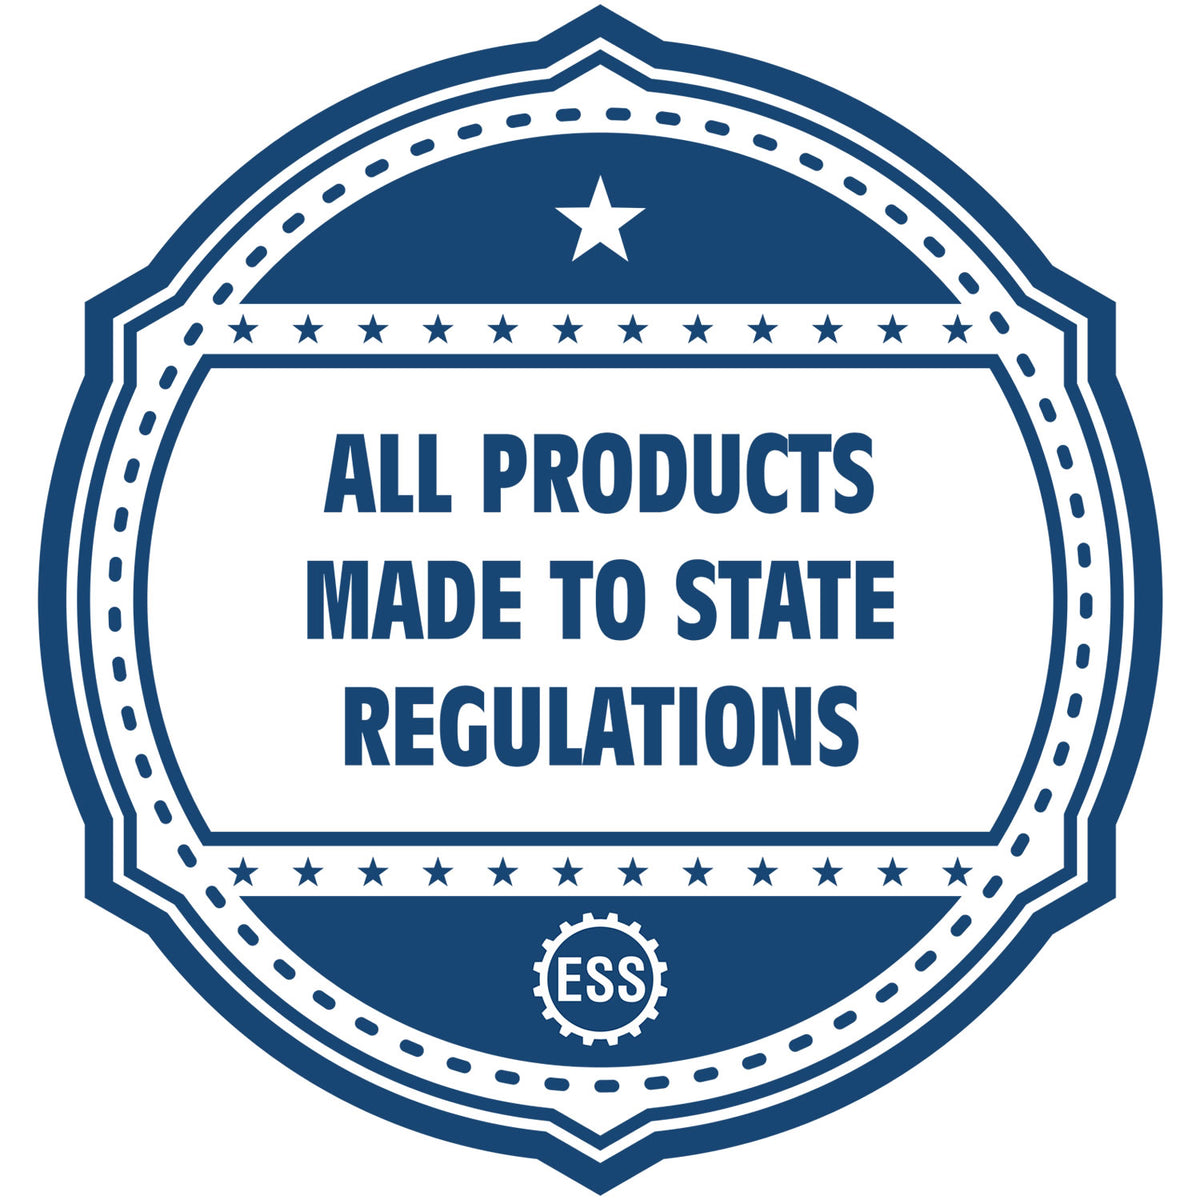 An icon or badge element for the Slim Pre-Inked Indiana Landscape Architect Seal Stamp showing that this product is made in compliance with state regulations.